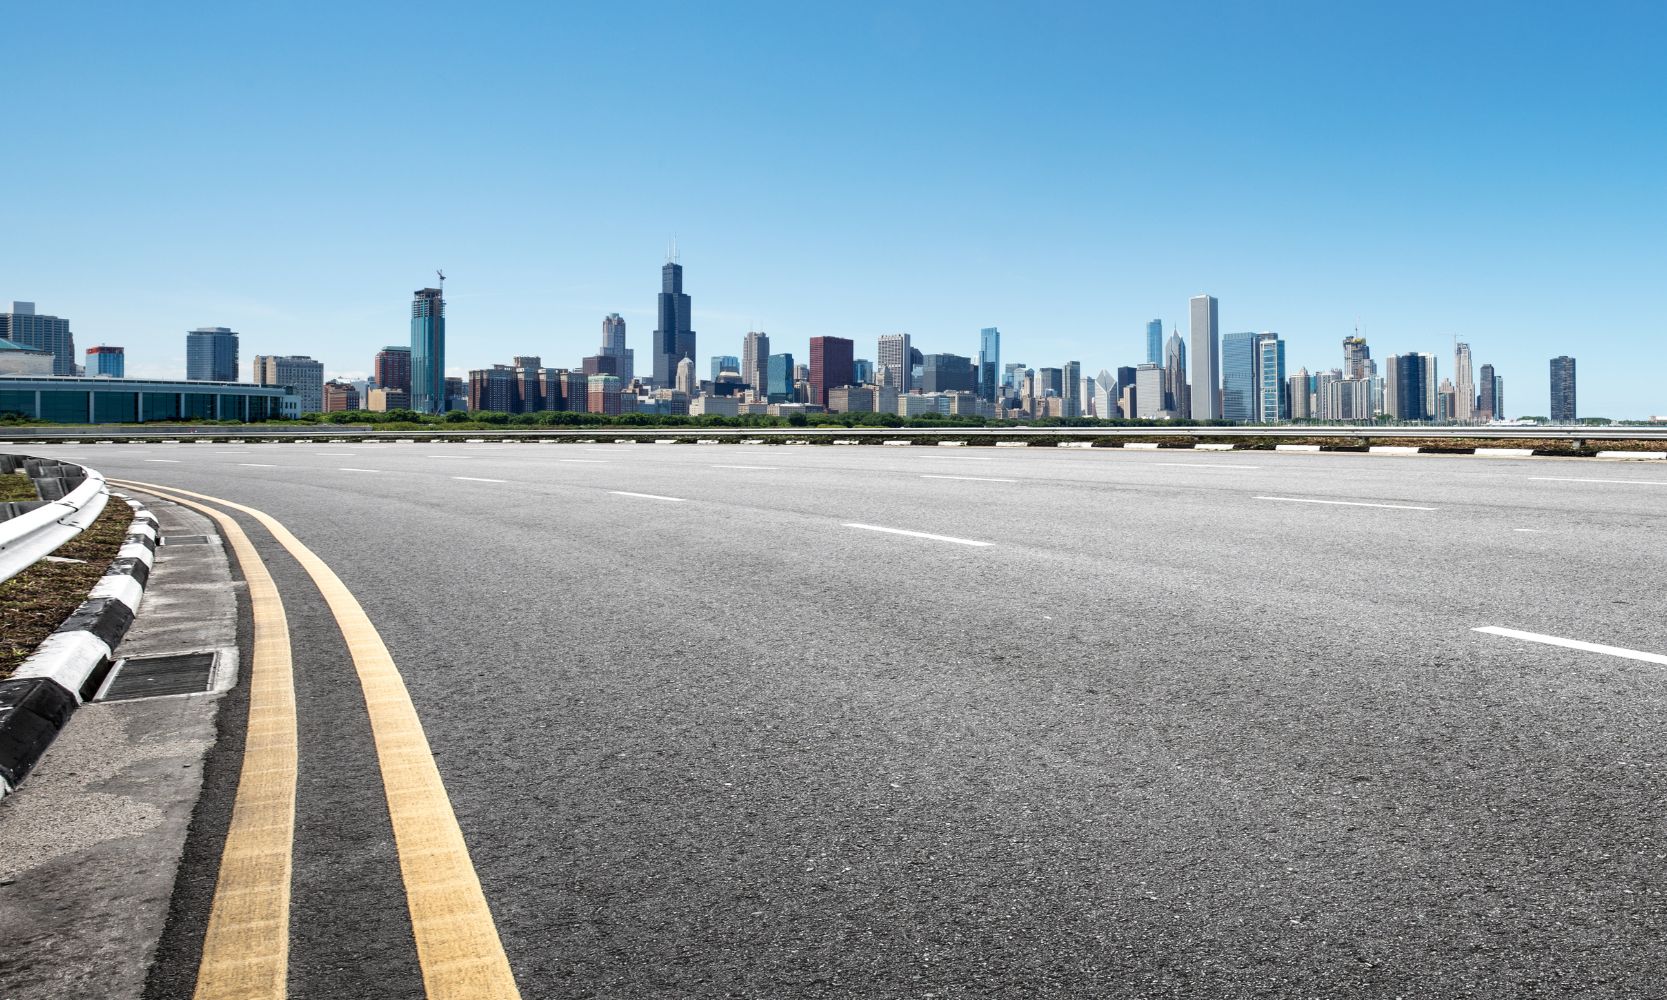 Image of Chicago skyline in the distant with the major highway in front of it